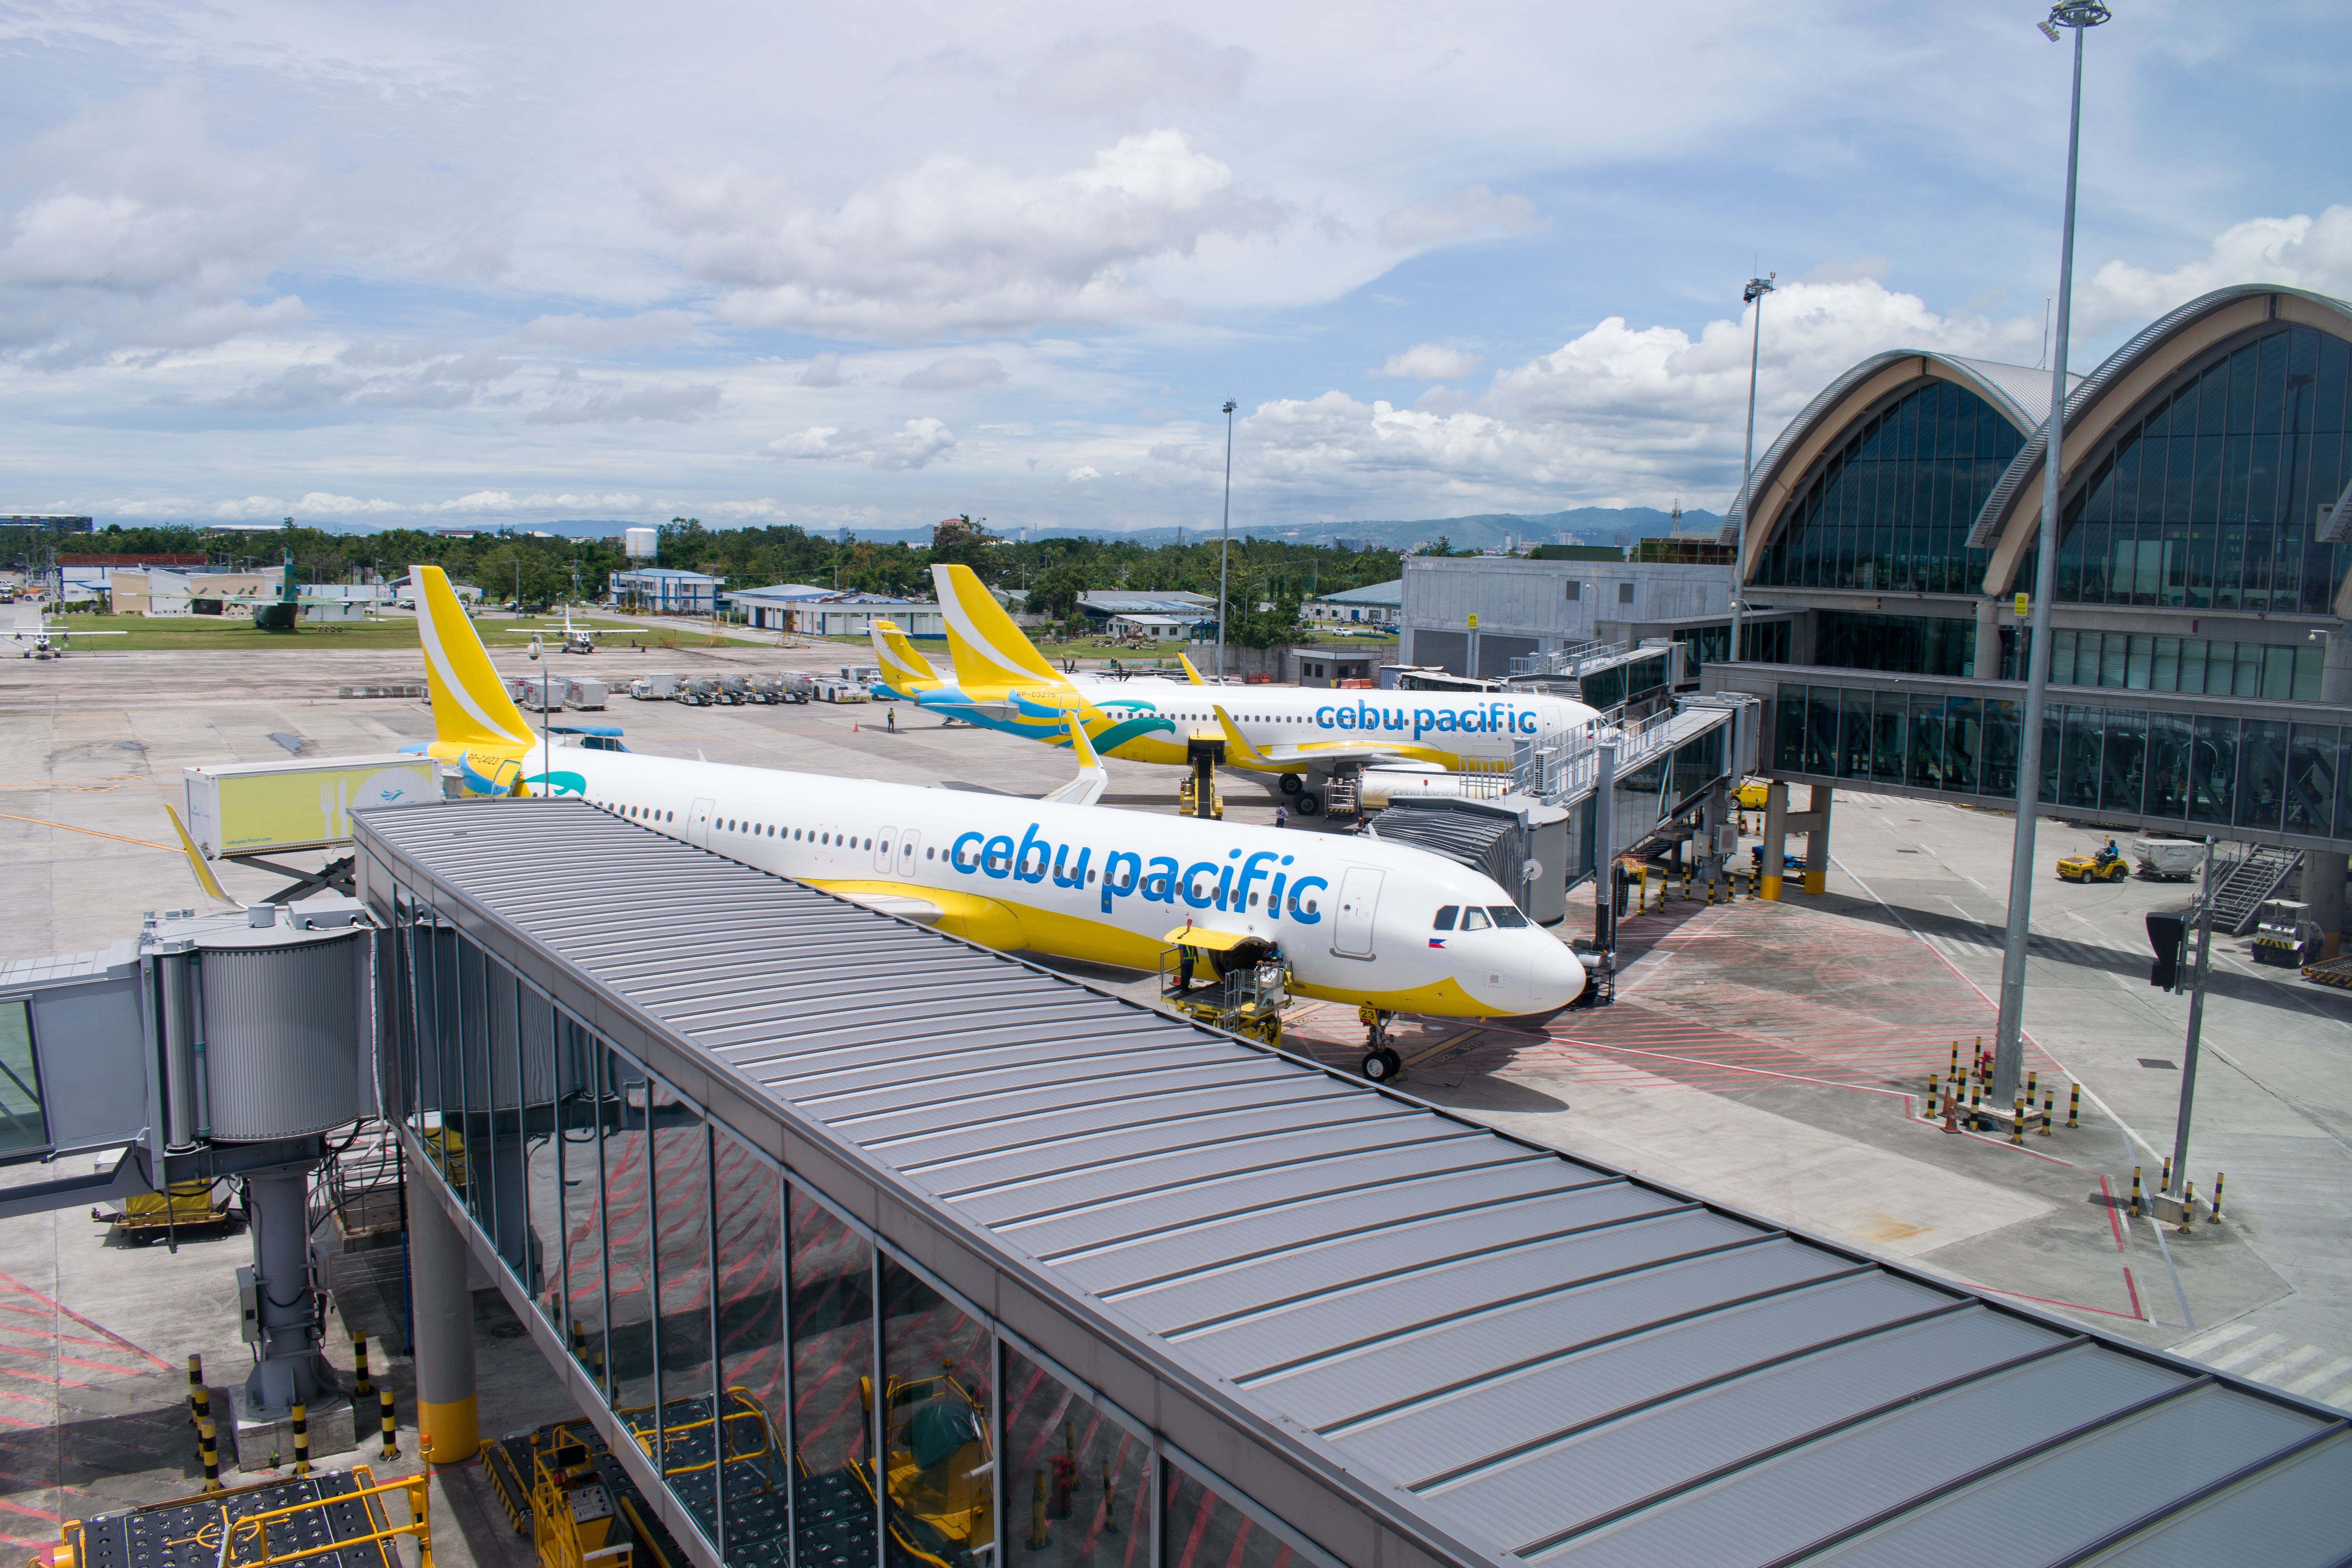 Cebu Pacific Air aircraft parked at the gates shutterstock_2151045773